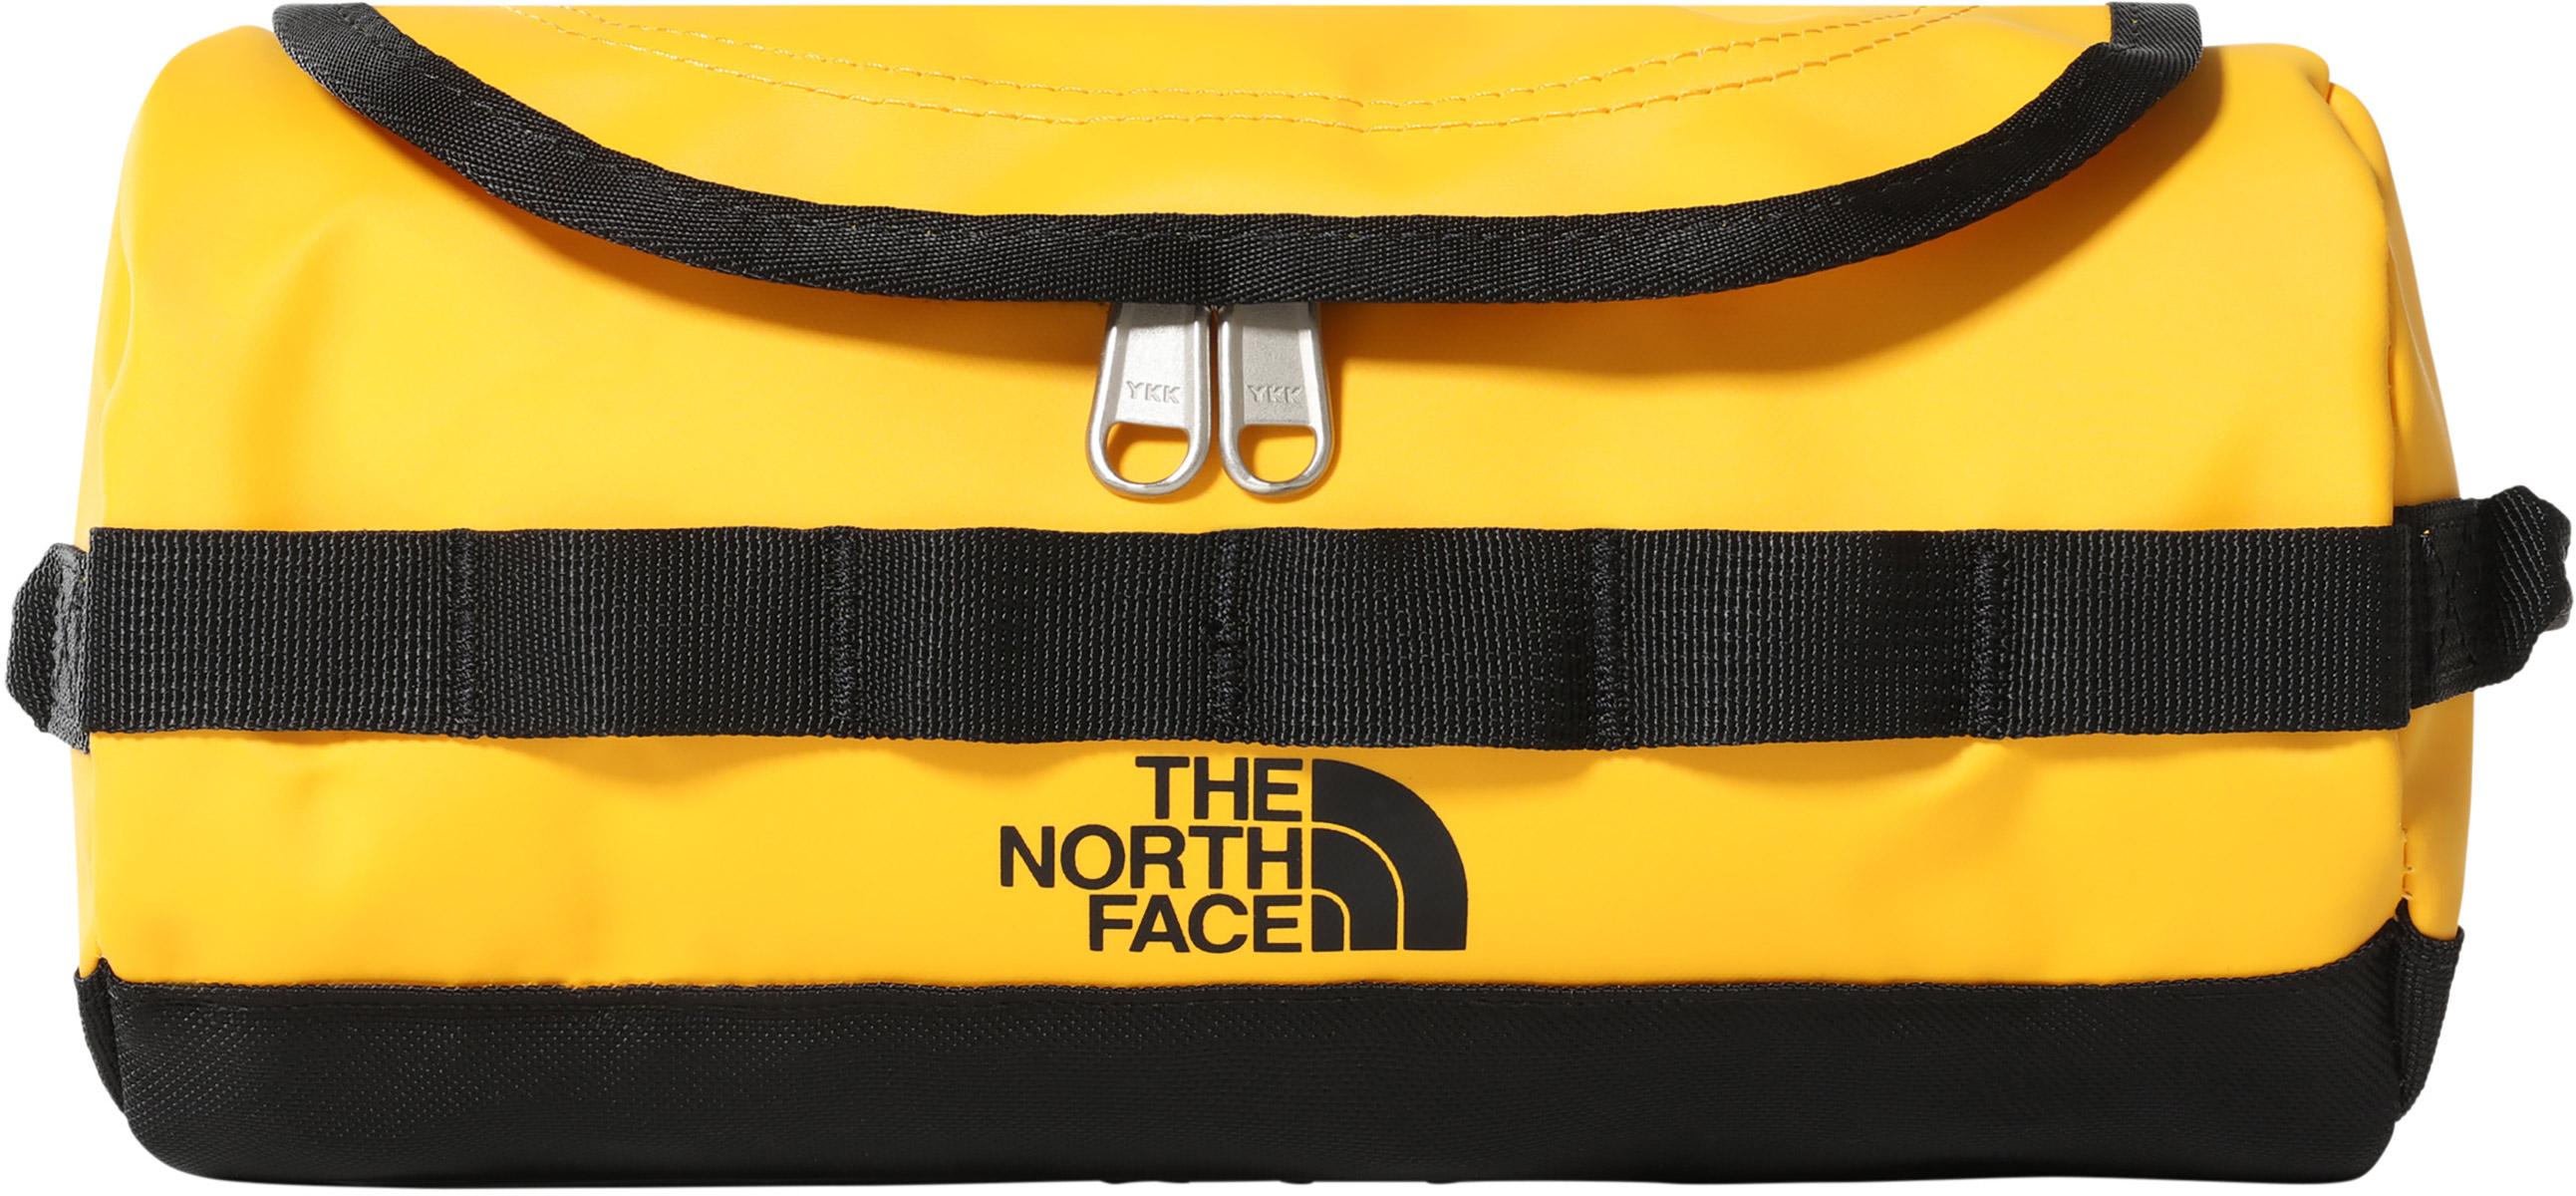 The North Face Travel Canister - Small - Summit Gold/tnf Black